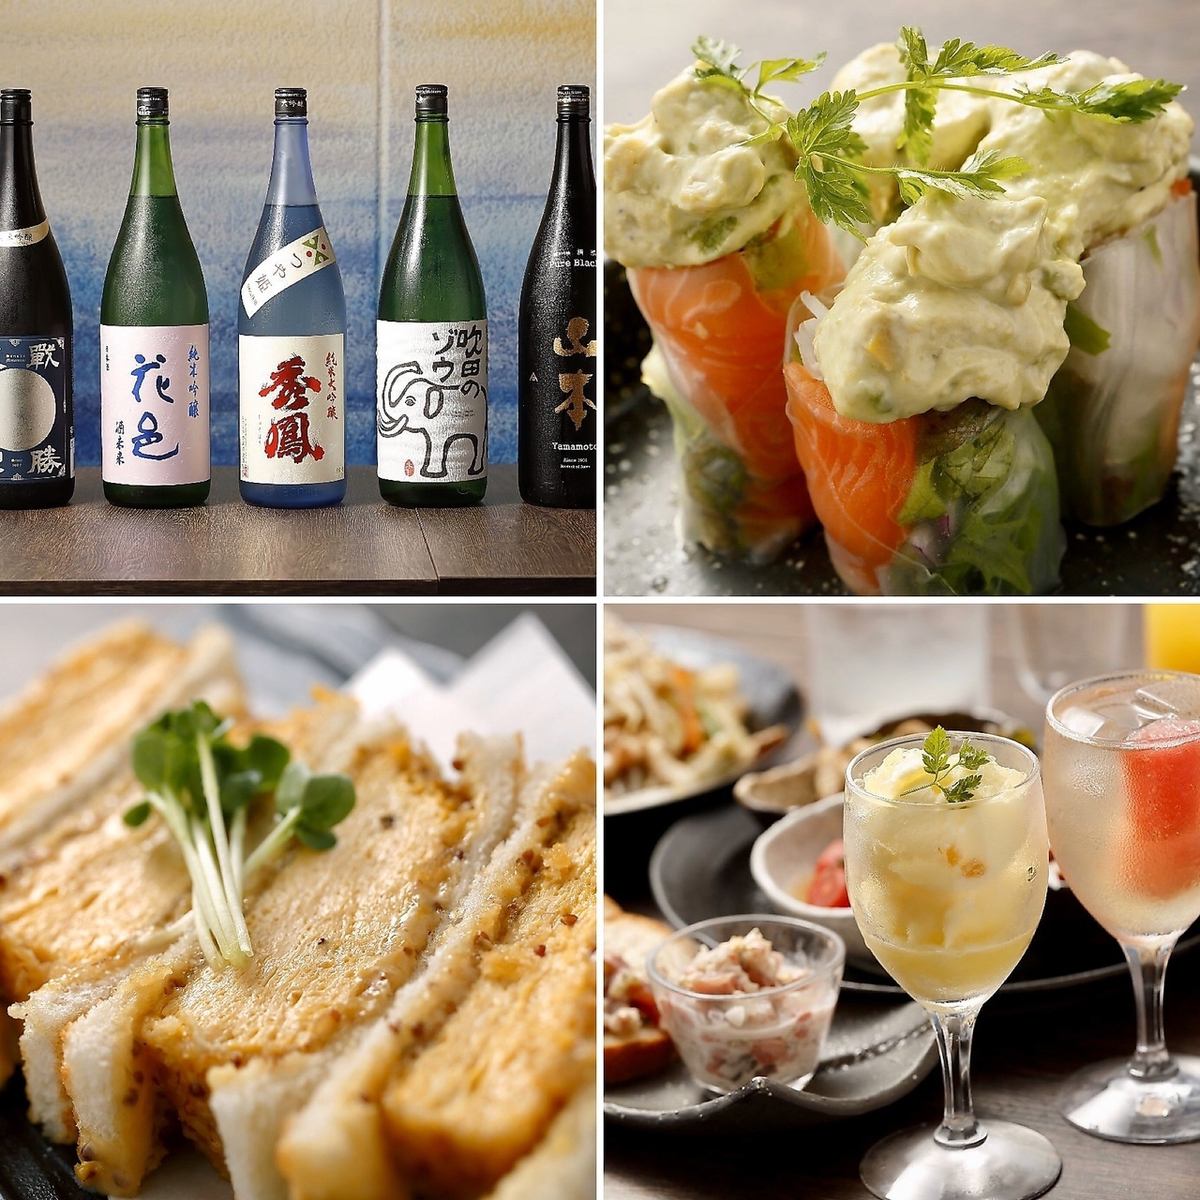 There are also specialty sake and fashionable and reasonable dishes.